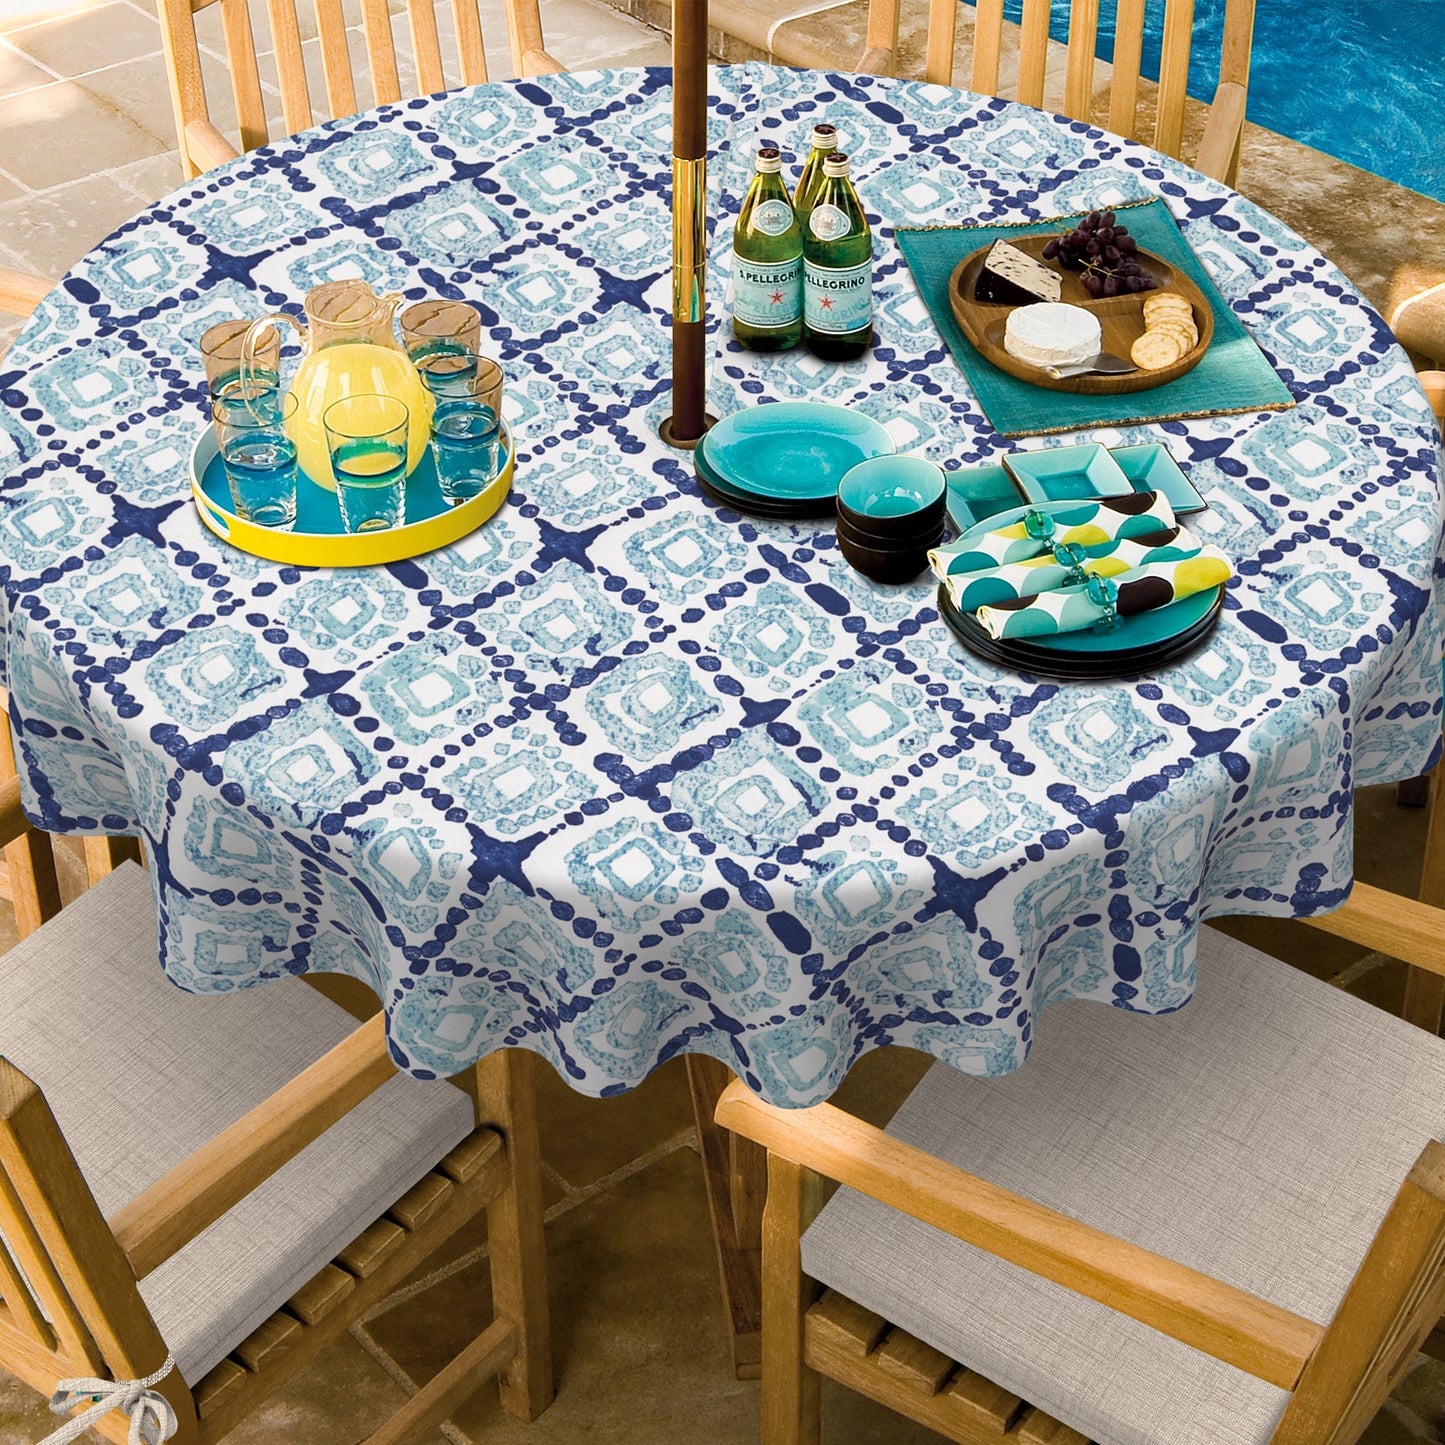 Melody Elephant Outdoor/Indoor Round Tablecloth with Umbrella Hole Zipper, Decorative Circular Table Cover for Home Garden, 60 Inch, Boho Geometry Blue